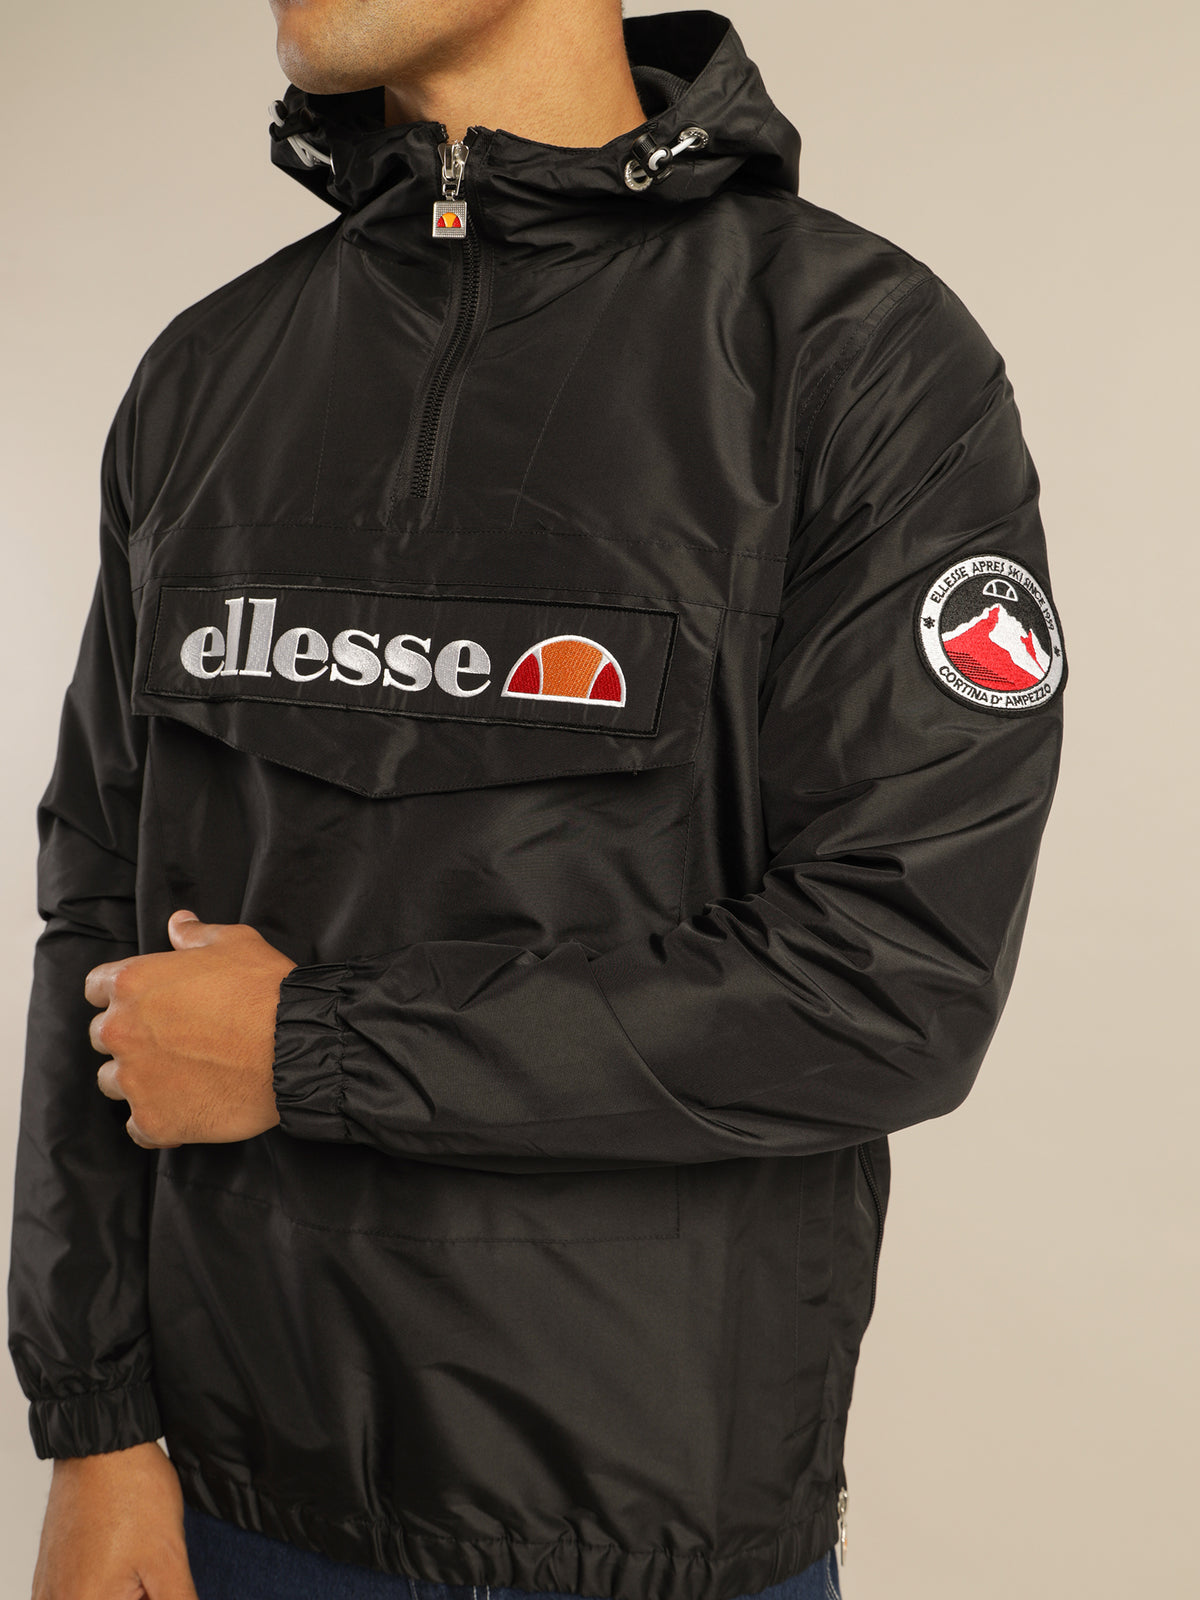 Mont 2 OH Jacket in Black